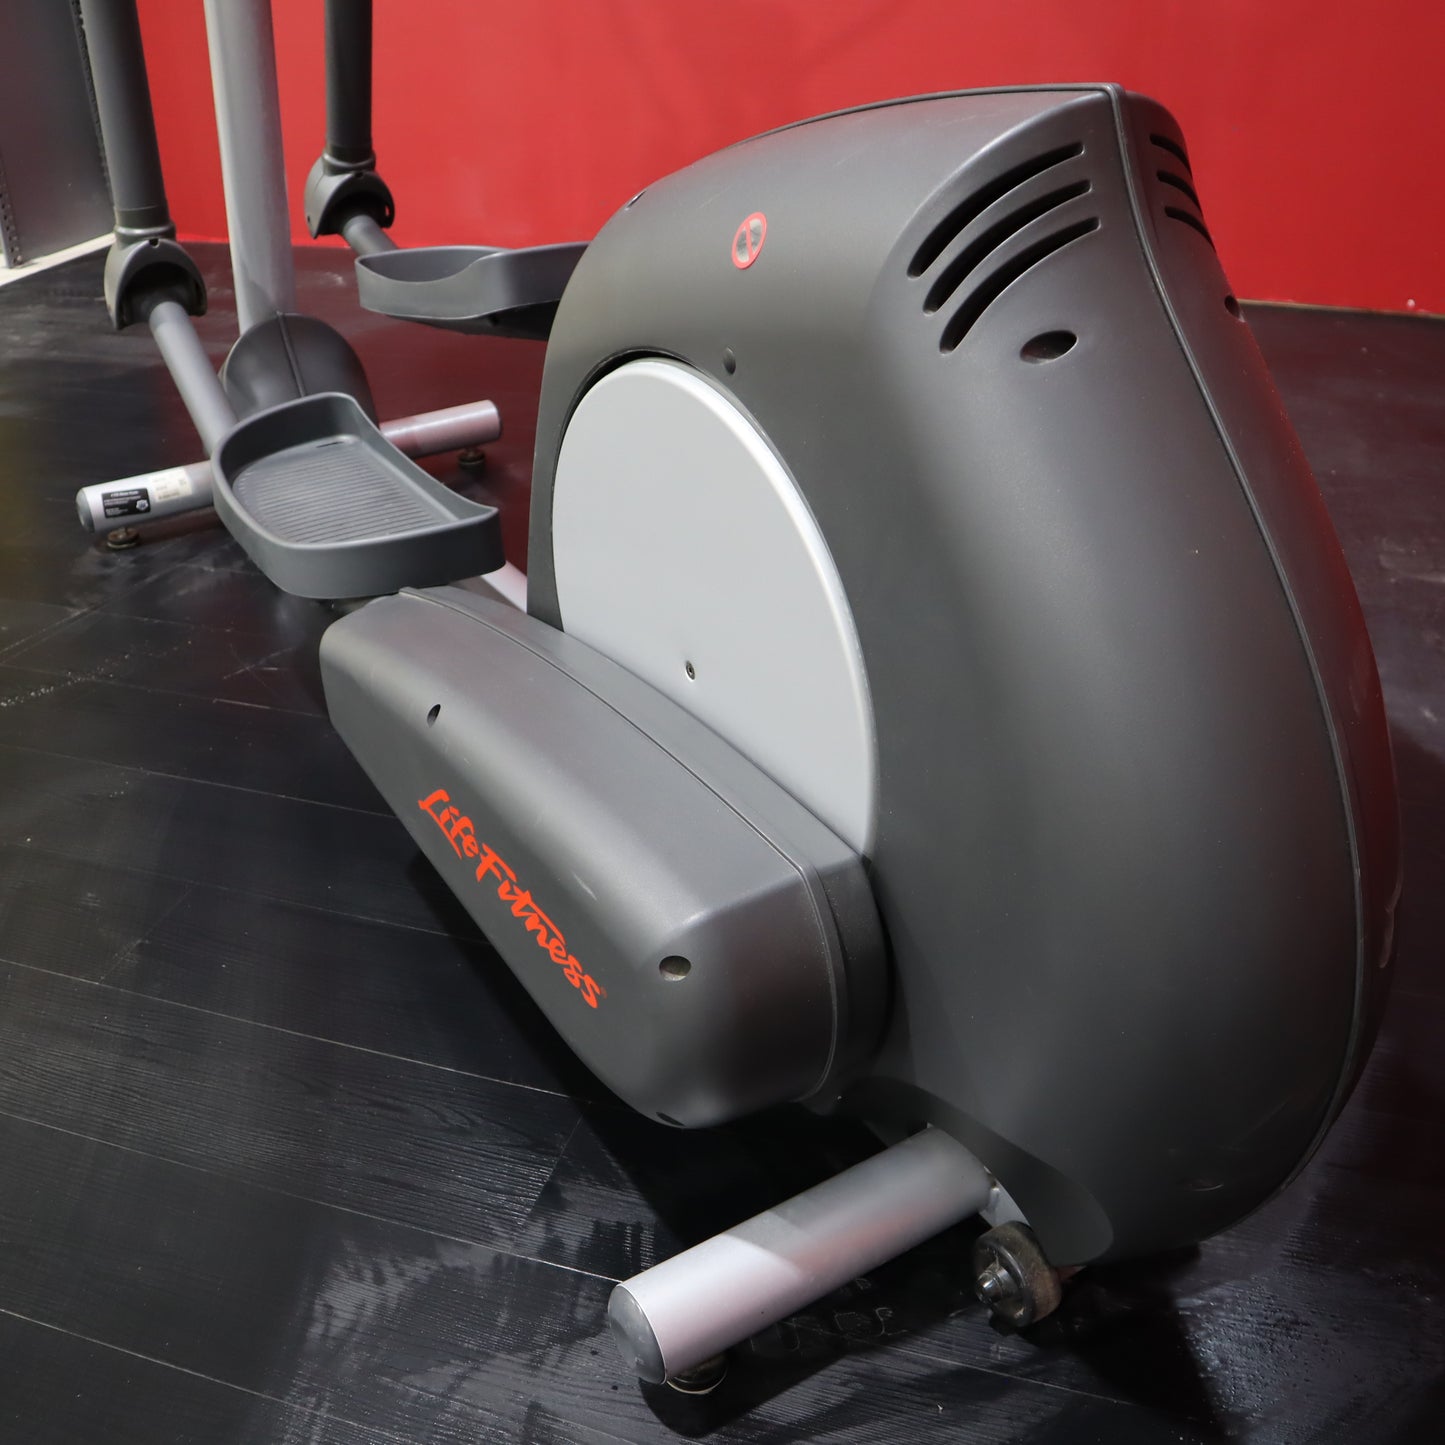 Life Fitness CLSX Integrity Series Elliptical Trainer (Refurbished)